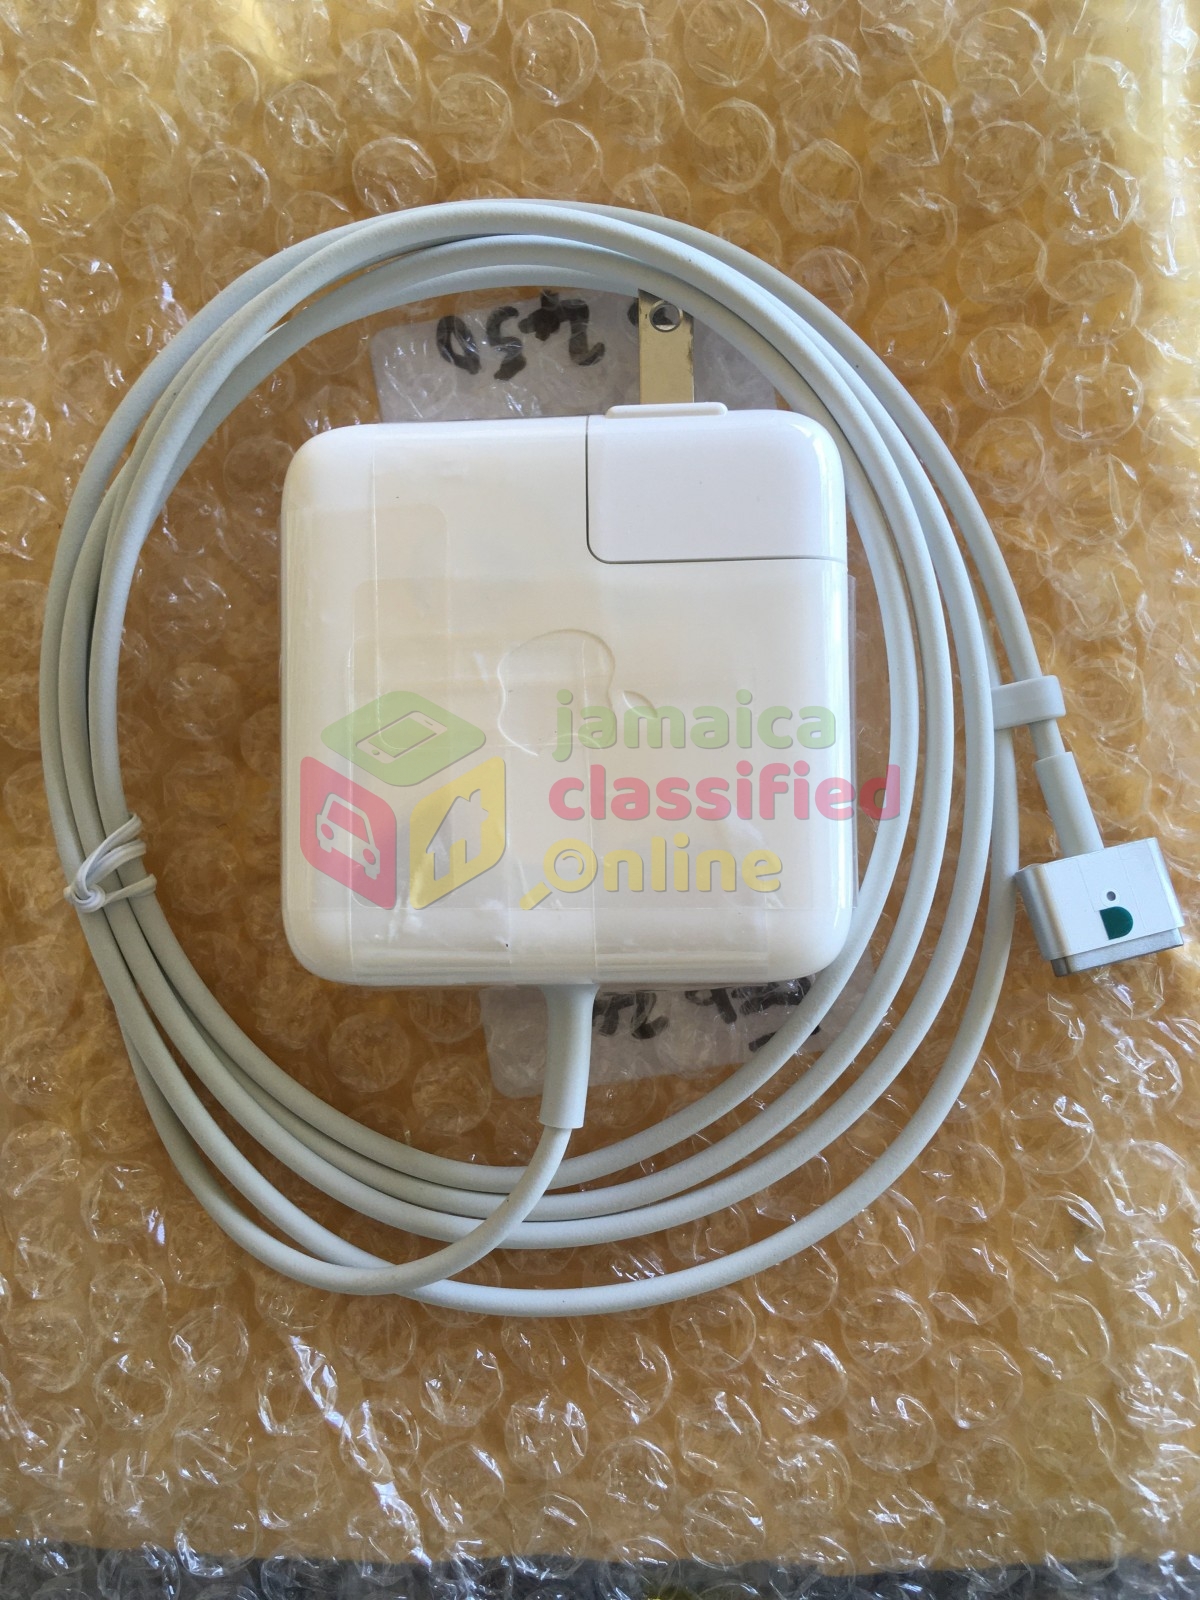 Original Apple Macbook Charger (Magsafe 2) for sale in Half Way Tree